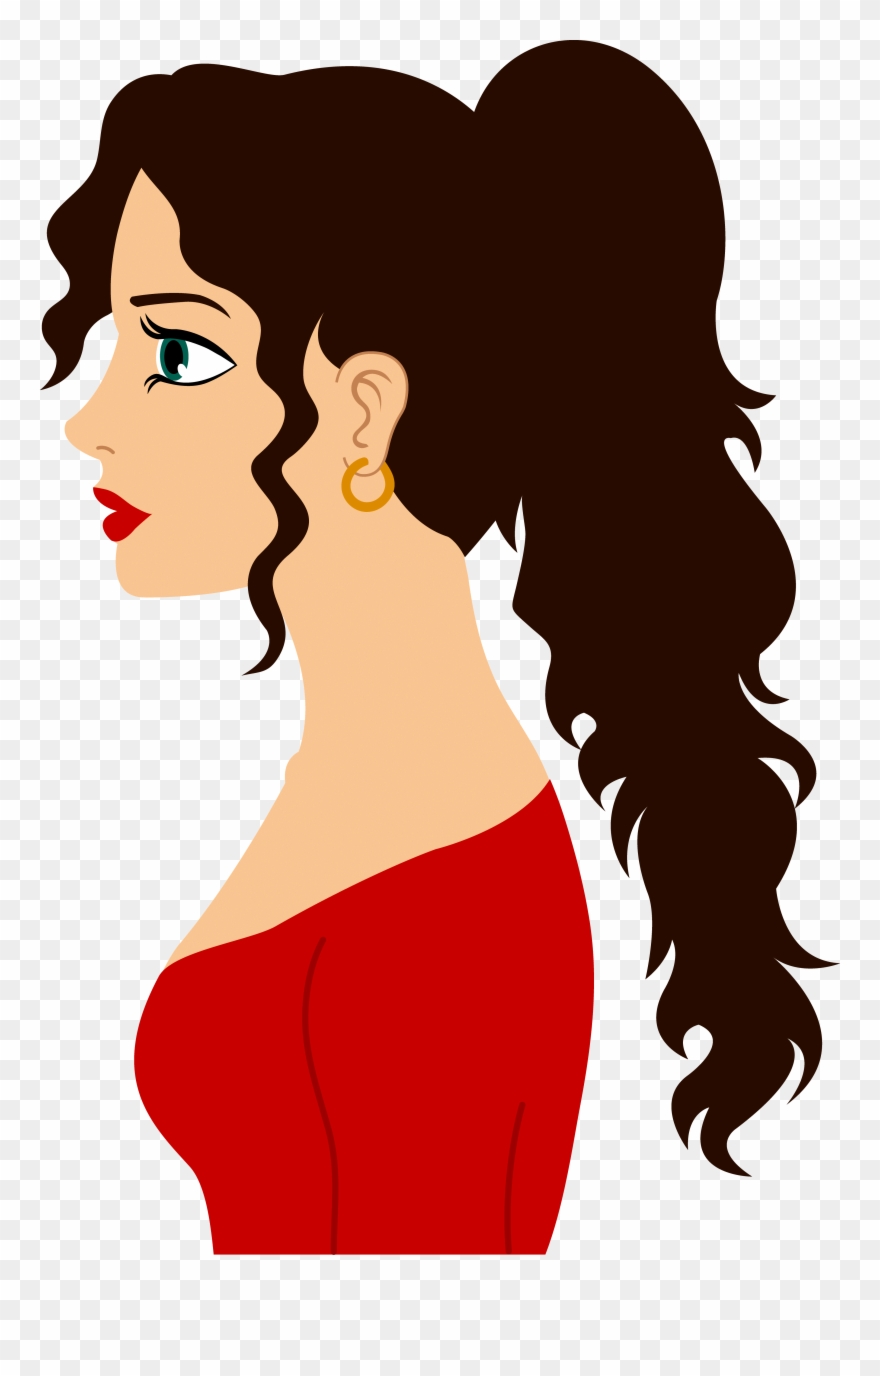 Clip Art Woman With Curly Hair Clipart Free Download.